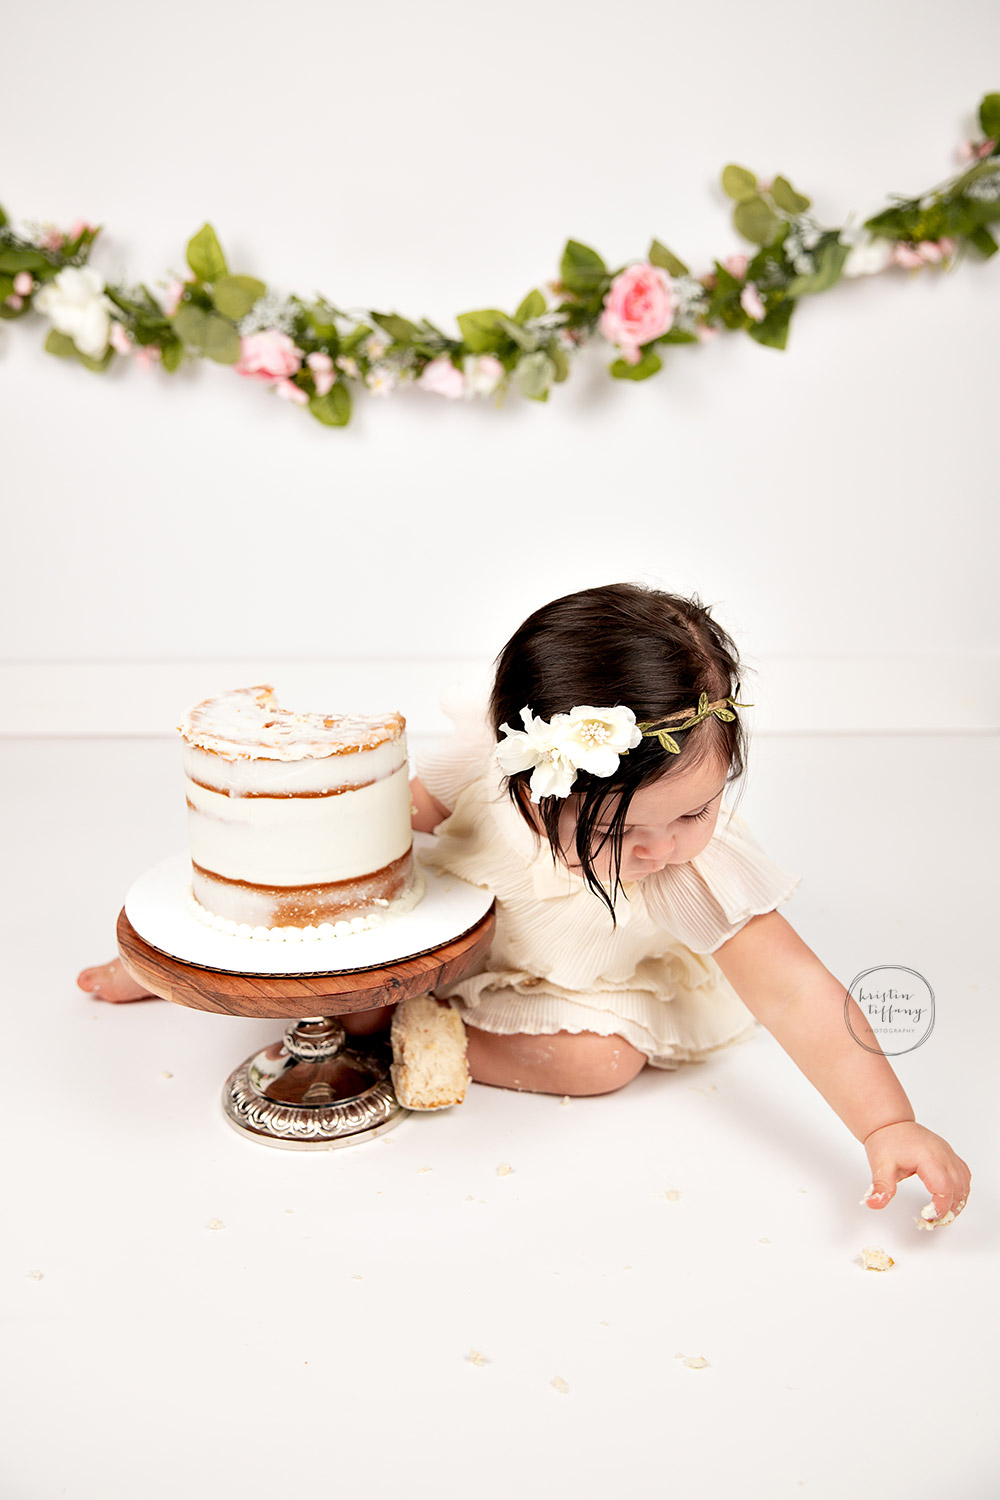 a photo of a baby girl at her cake smash session